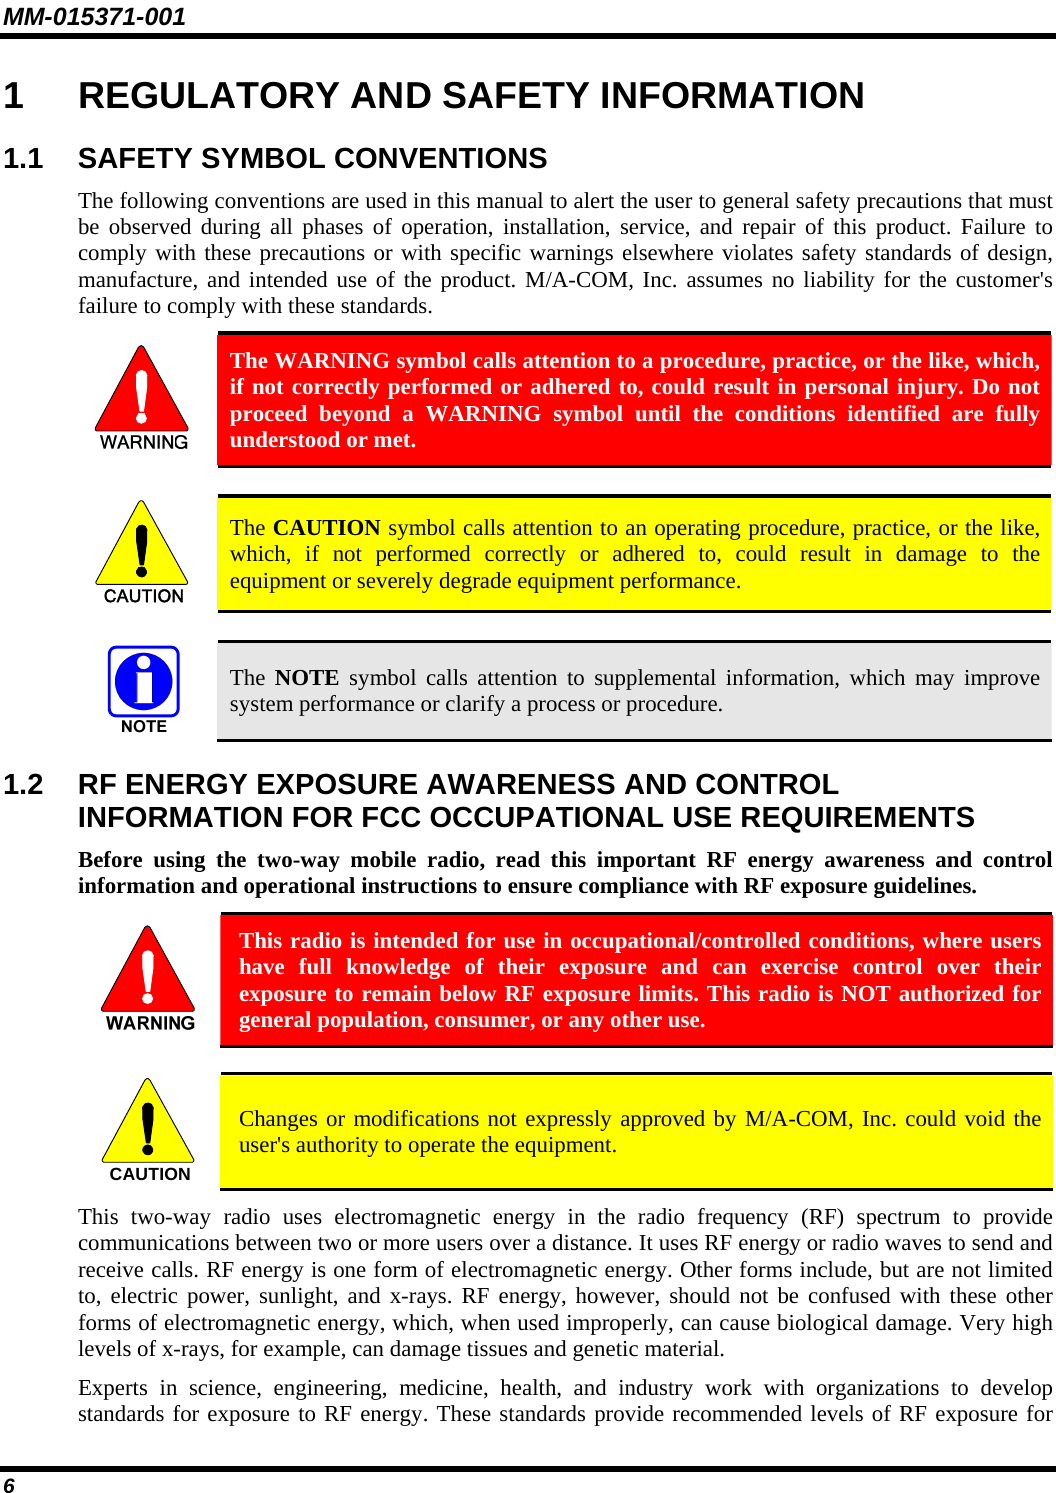 MM-015371-001 6 1  REGULATORY AND SAFETY INFORMATION 1.1  SAFETY SYMBOL CONVENTIONS The following conventions are used in this manual to alert the user to general safety precautions that must be observed during all phases of operation, installation, service, and repair of this product. Failure to comply with these precautions or with specific warnings elsewhere violates safety standards of design, manufacture, and intended use of the product. M/A-COM, Inc. assumes no liability for the customer&apos;s failure to comply with these standards.  The WARNING symbol calls attention to a procedure, practice, or the like, which, if not correctly performed or adhered to, could result in personal injury. Do not proceed beyond a WARNING symbol until the conditions identified are fully understood or met.   CAUTION  The CAUTION symbol calls attention to an operating procedure, practice, or the like, which, if not performed correctly or adhered to, could result in damage to the equipment or severely degrade equipment performance.    The NOTE symbol calls attention to supplemental information, which may improve system performance or clarify a process or procedure. 1.2  RF ENERGY EXPOSURE AWARENESS AND CONTROL INFORMATION FOR FCC OCCUPATIONAL USE REQUIREMENTS Before using the two-way mobile radio, read this important RF energy awareness and control information and operational instructions to ensure compliance with RF exposure guidelines.  This radio is intended for use in occupational/controlled conditions, where users have full knowledge of their exposure and can exercise control over their exposure to remain below RF exposure limits. This radio is NOT authorized for general population, consumer, or any other use.  CAUTION  Changes or modifications not expressly approved by M/A-COM, Inc. could void the user&apos;s authority to operate the equipment. This two-way radio uses electromagnetic energy in the radio frequency (RF) spectrum to provide communications between two or more users over a distance. It uses RF energy or radio waves to send and receive calls. RF energy is one form of electromagnetic energy. Other forms include, but are not limited to, electric power, sunlight, and x-rays. RF energy, however, should not be confused with these other forms of electromagnetic energy, which, when used improperly, can cause biological damage. Very high levels of x-rays, for example, can damage tissues and genetic material. Experts in science, engineering, medicine, health, and industry work with organizations to develop standards for exposure to RF energy. These standards provide recommended levels of RF exposure for 